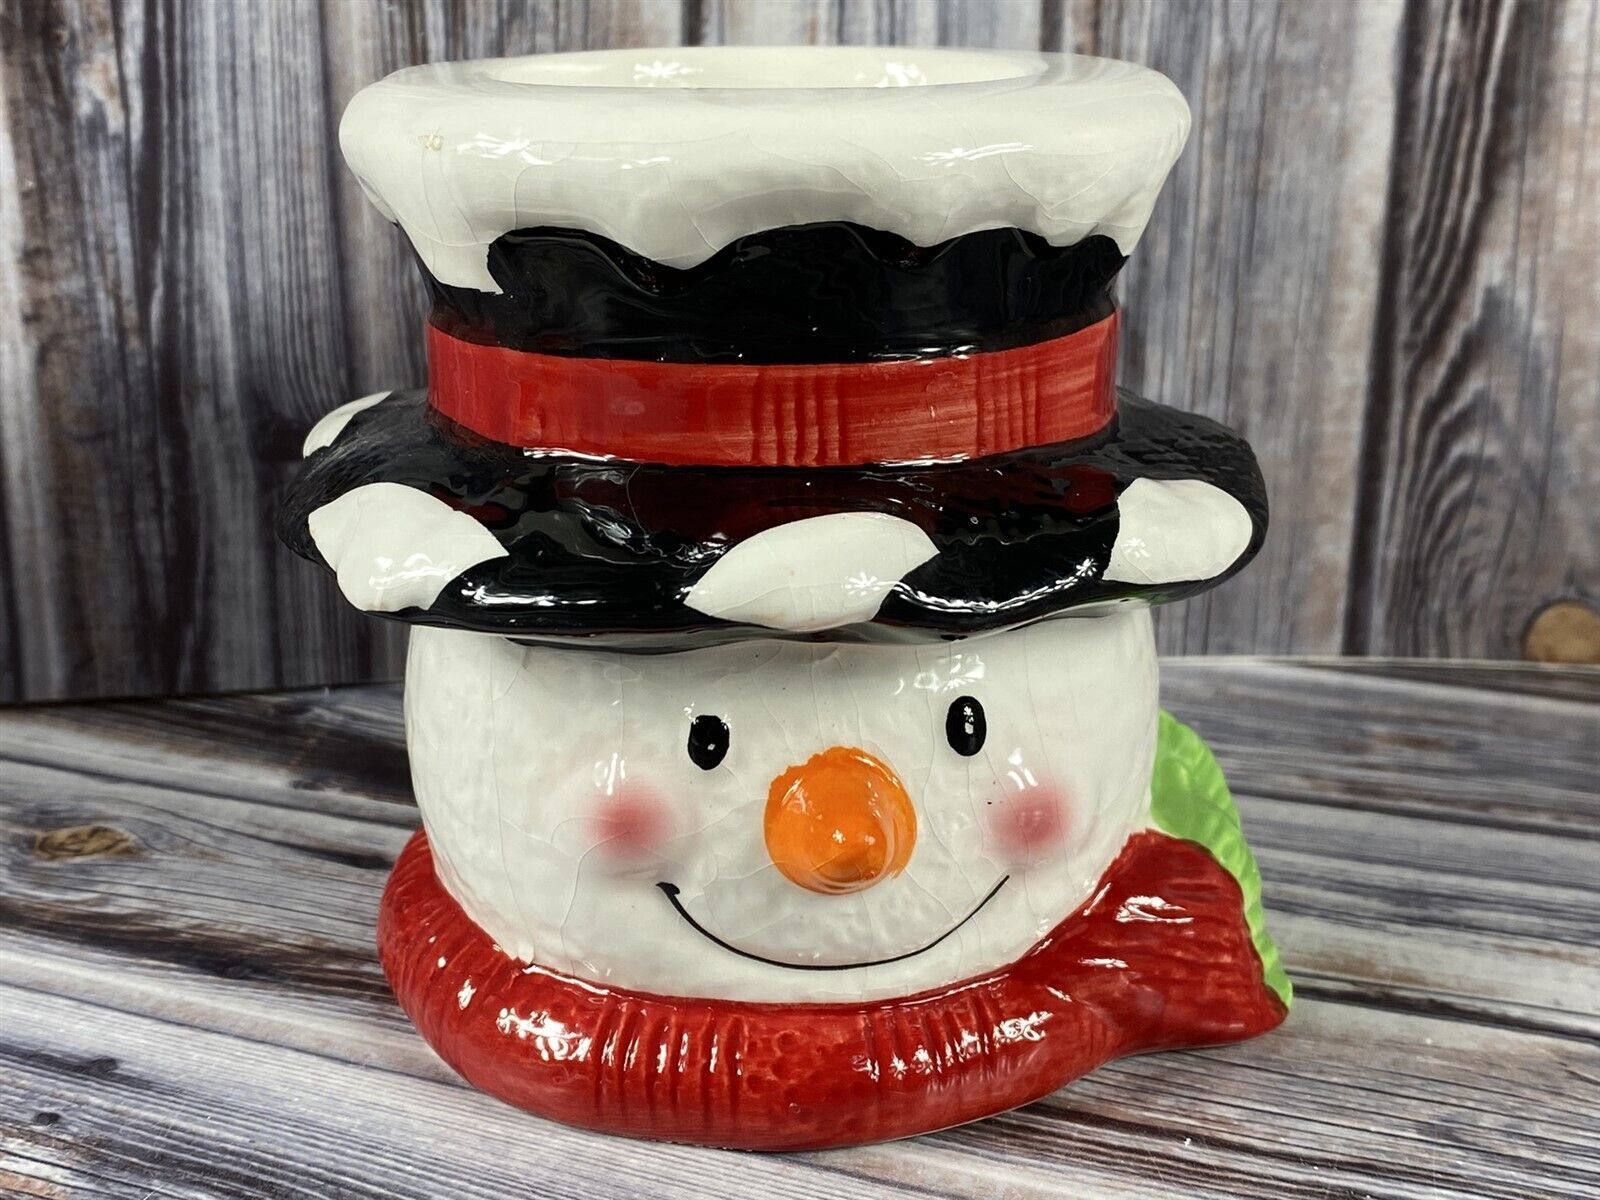 Yankee Candle Snowman Tea Light Candle Holder - $9.74